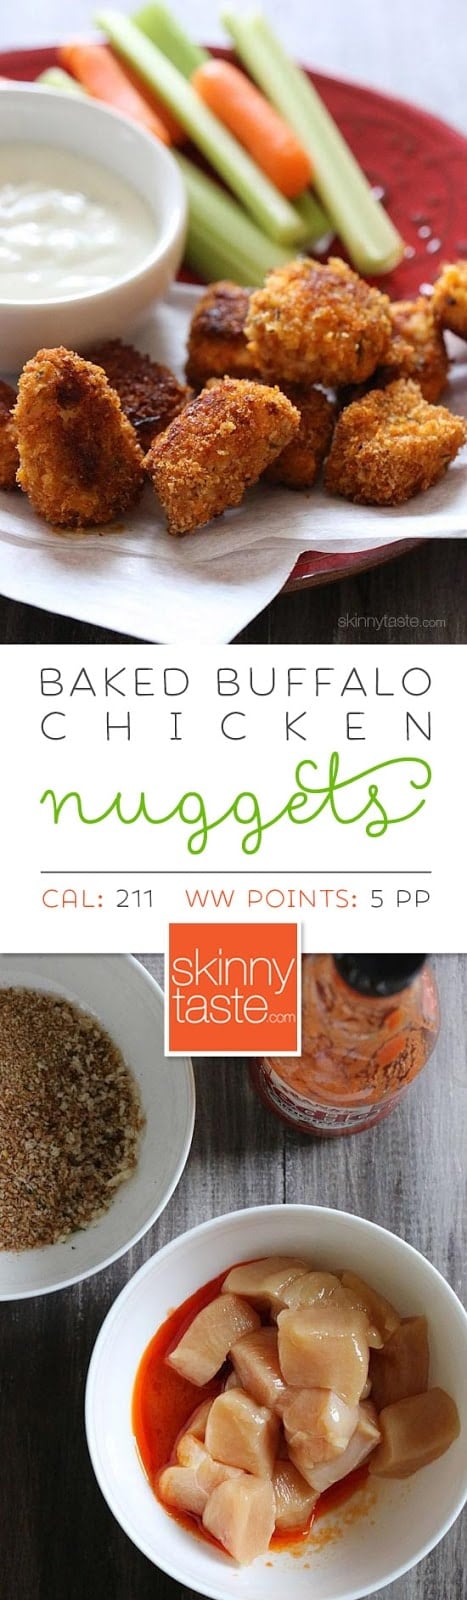 Baked Buffalo Chicken Nuggets – healthy baked chicken nuggets with a touch of heat!